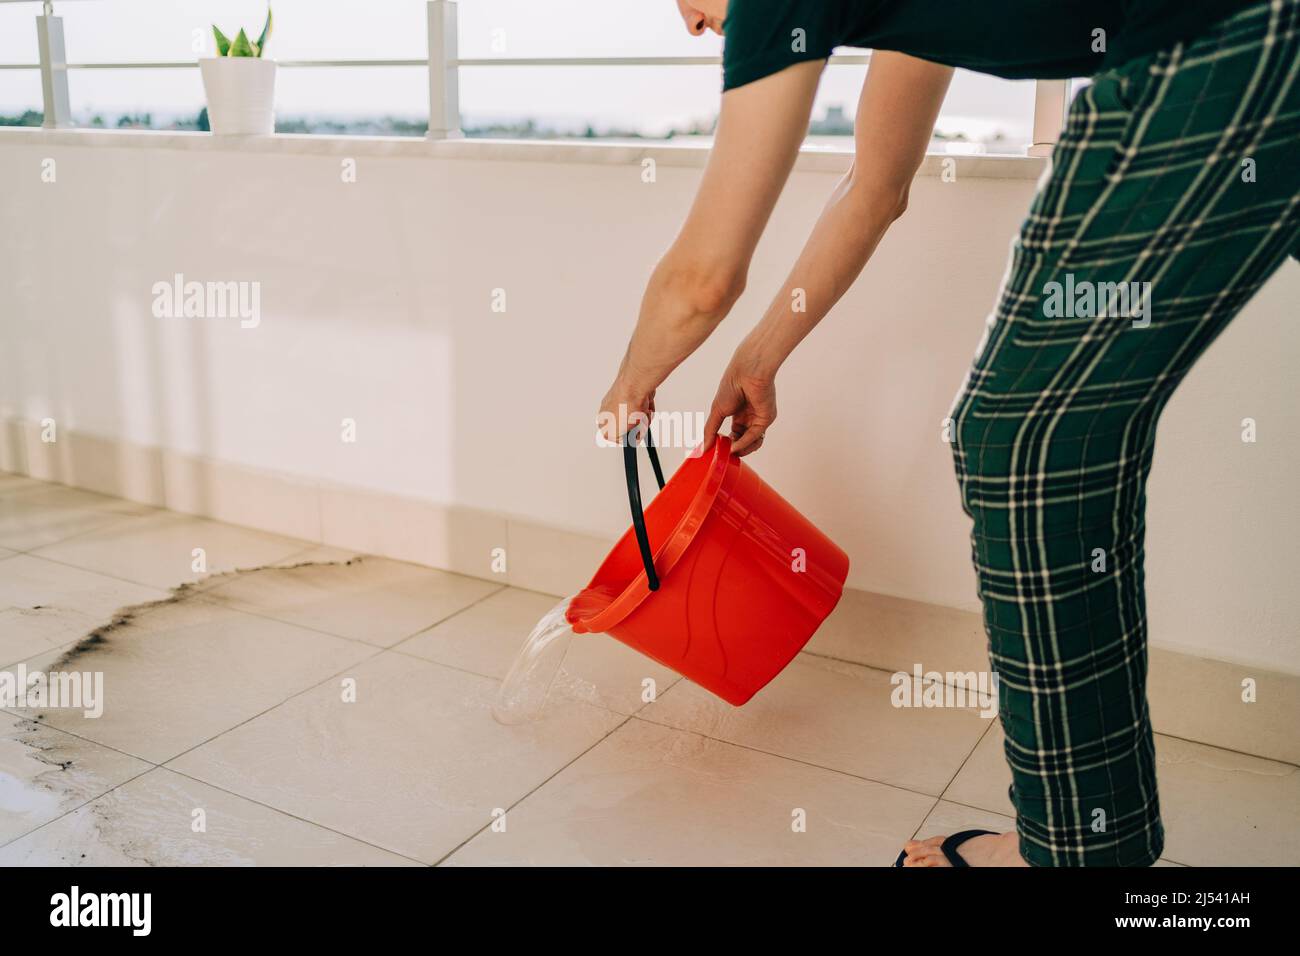 Man spilling the water from red bucket onto the tiled floor on the balcony in sunny day. Adult male doing home chores washing floors on the patio Stock Photo